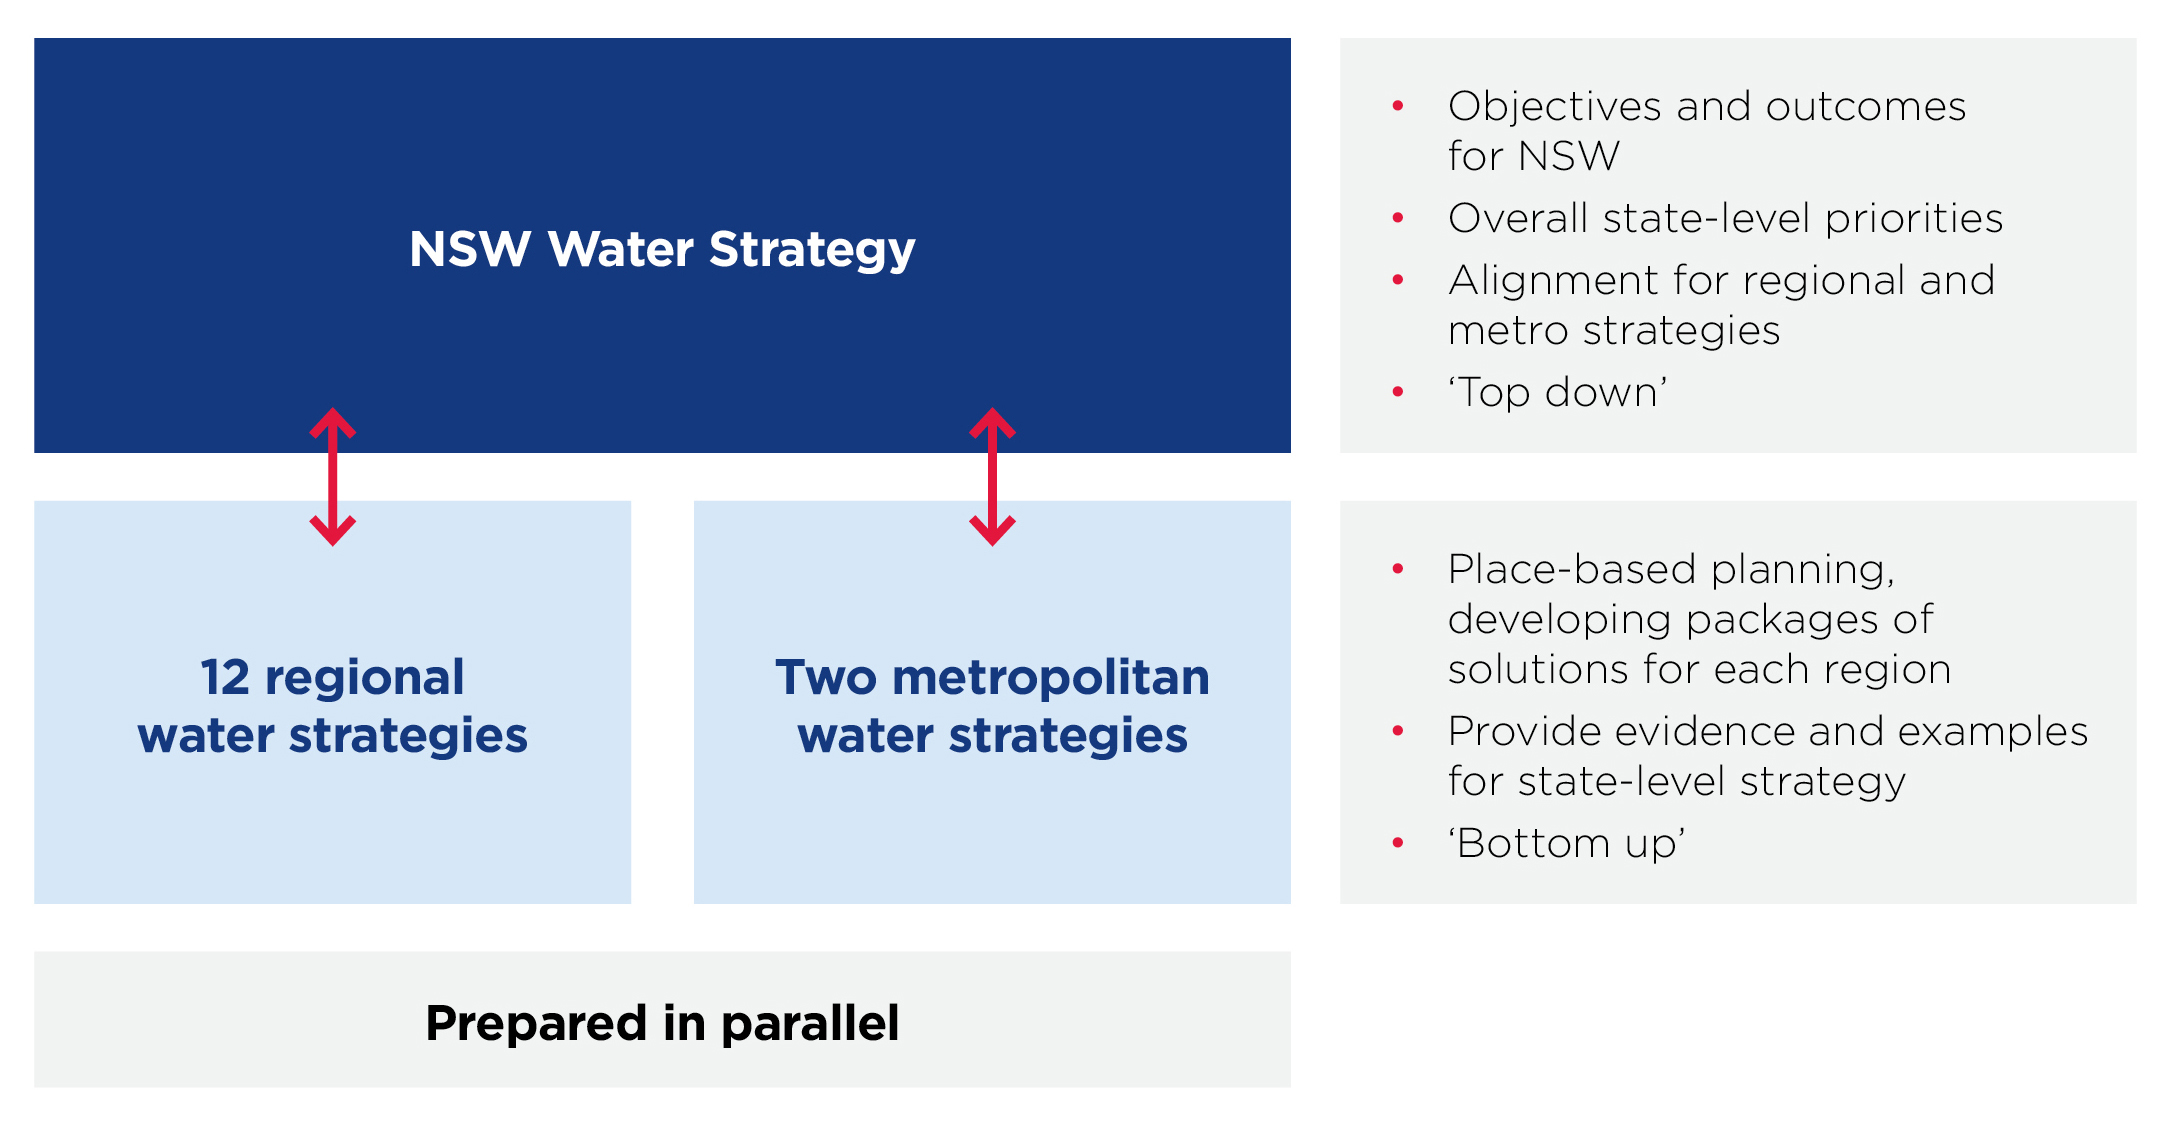 How the NSW Water Strategy and regional and metropolitan water strategies interact